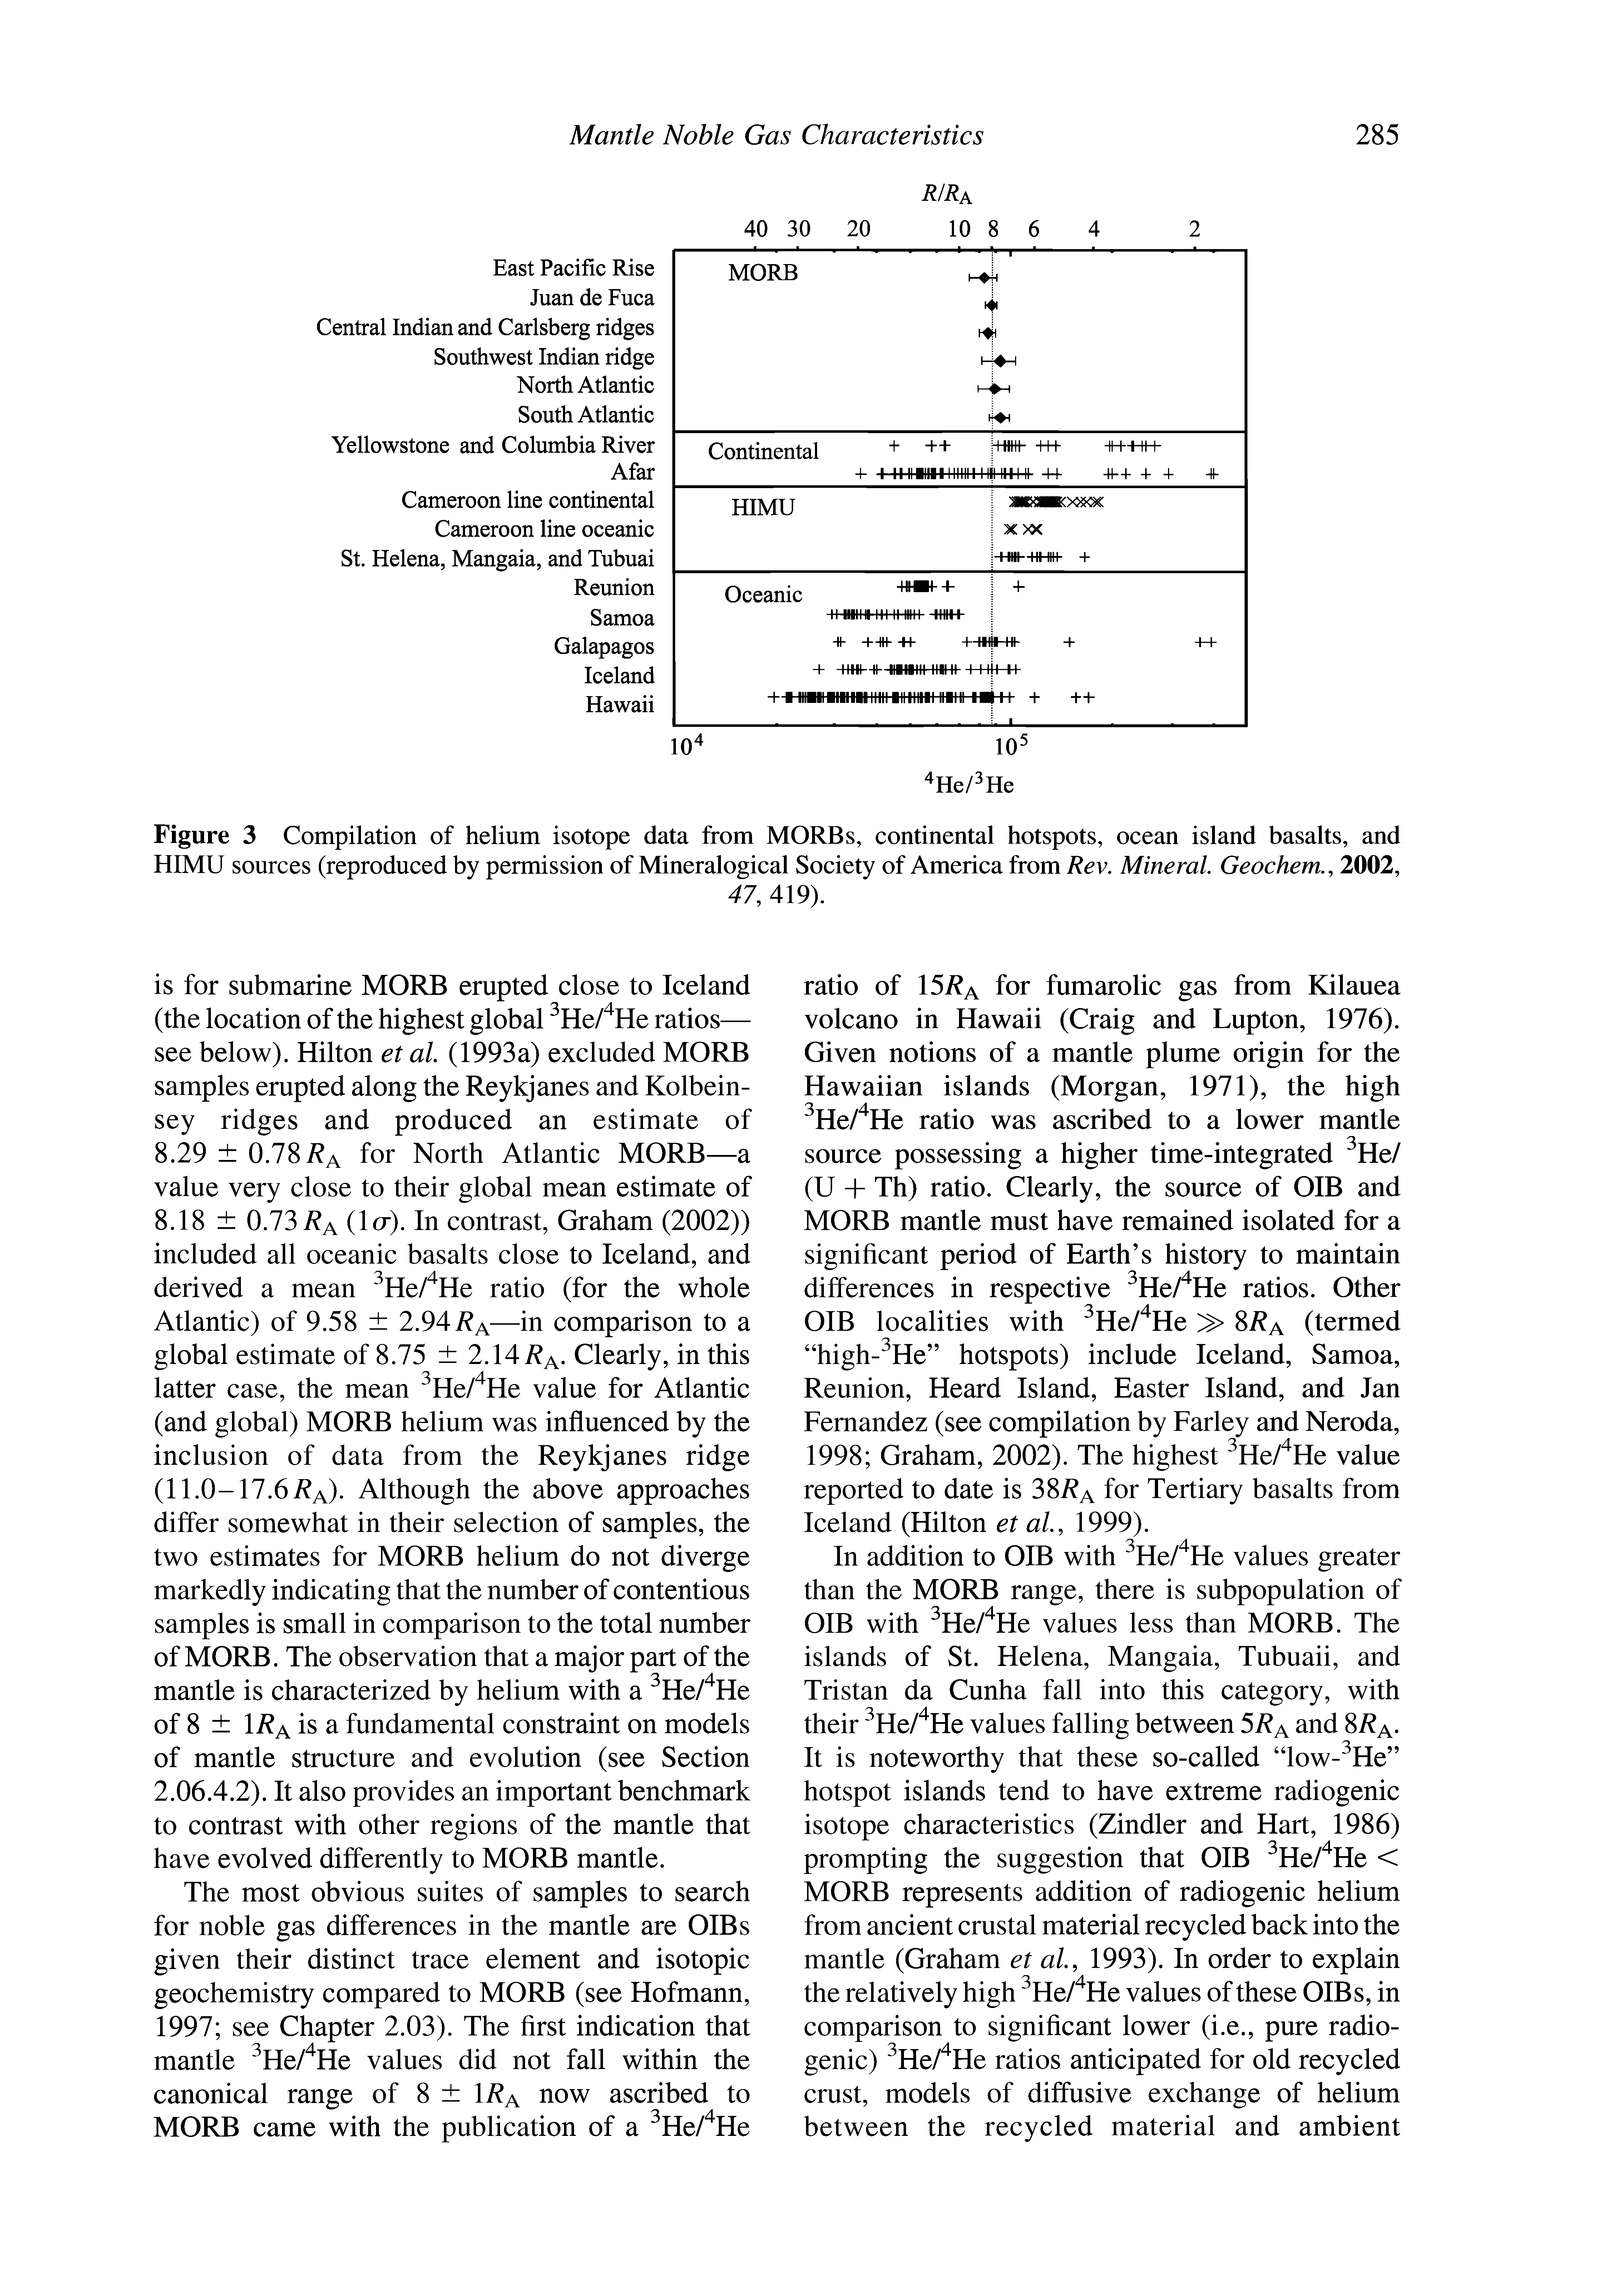 Figure 3 Compilation of helium isotope data from MORBs, continental hotspots, ocean island basalts, and HIMU sources (reproduced by permission of Mineralogical Society of America from Rev. Mineral. Geochem., 2002,...